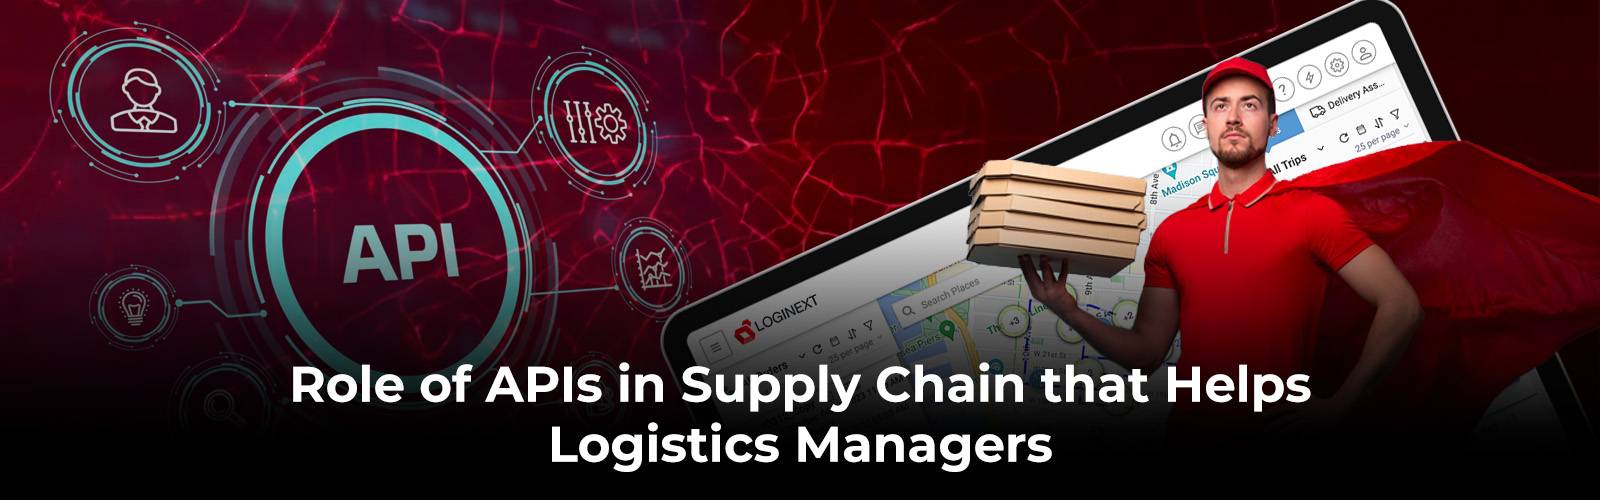 Role of APIs in Supply Chain